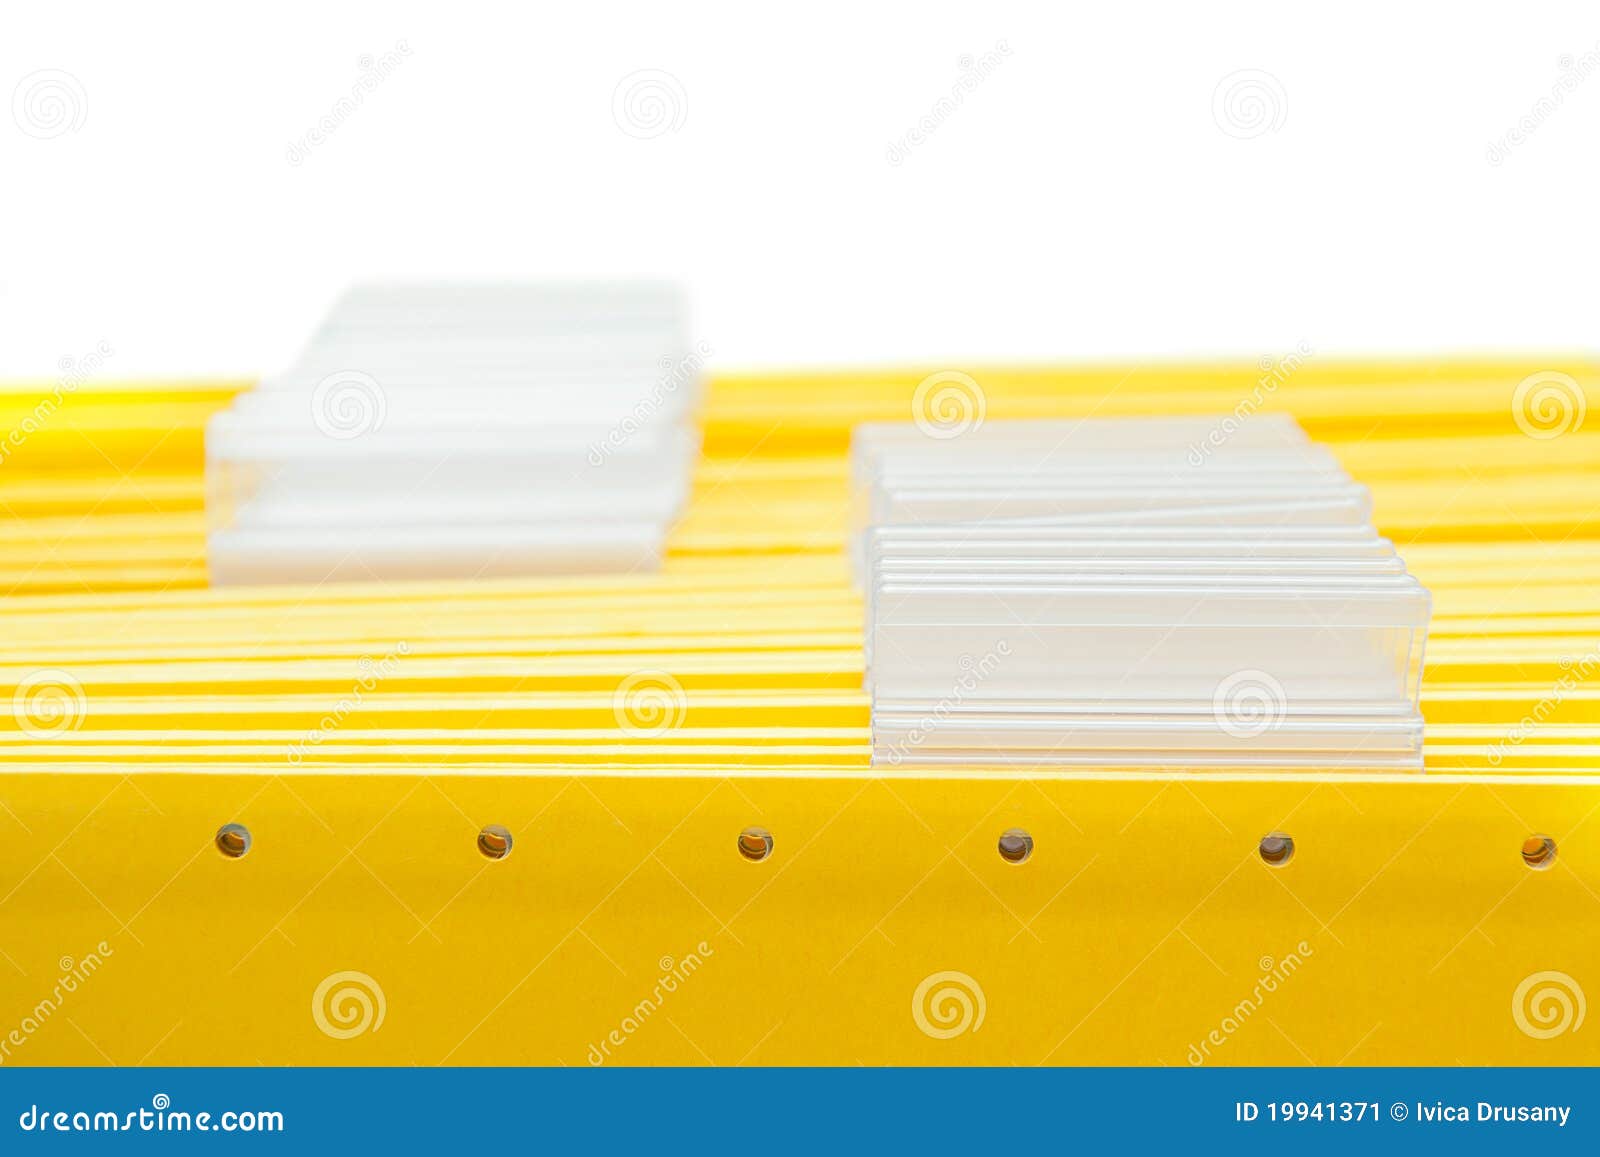 Yellow Office Folders With Empty Name Tags Stock Image - Image: 19941371